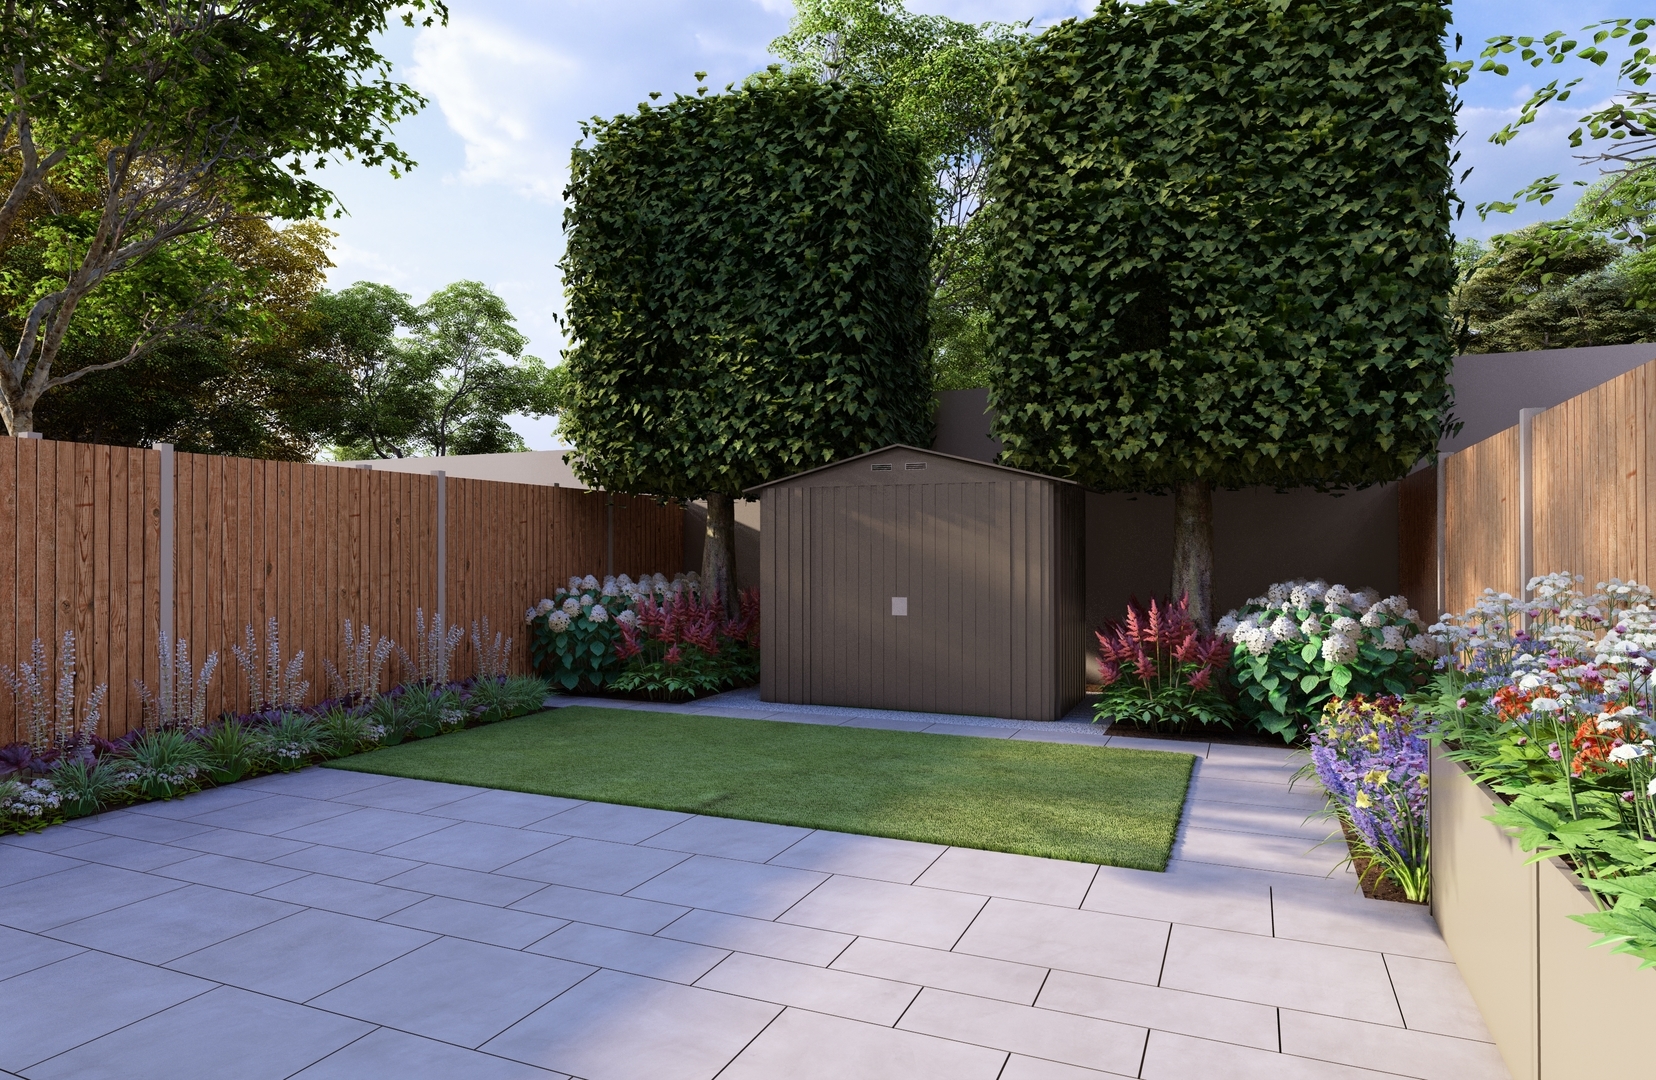 Garden Design Dublin 9 features natural limestone paving, Biohort Garden Shed & Belvedere Planter Beds, mature pleached trees and colourful perennial planted borders.